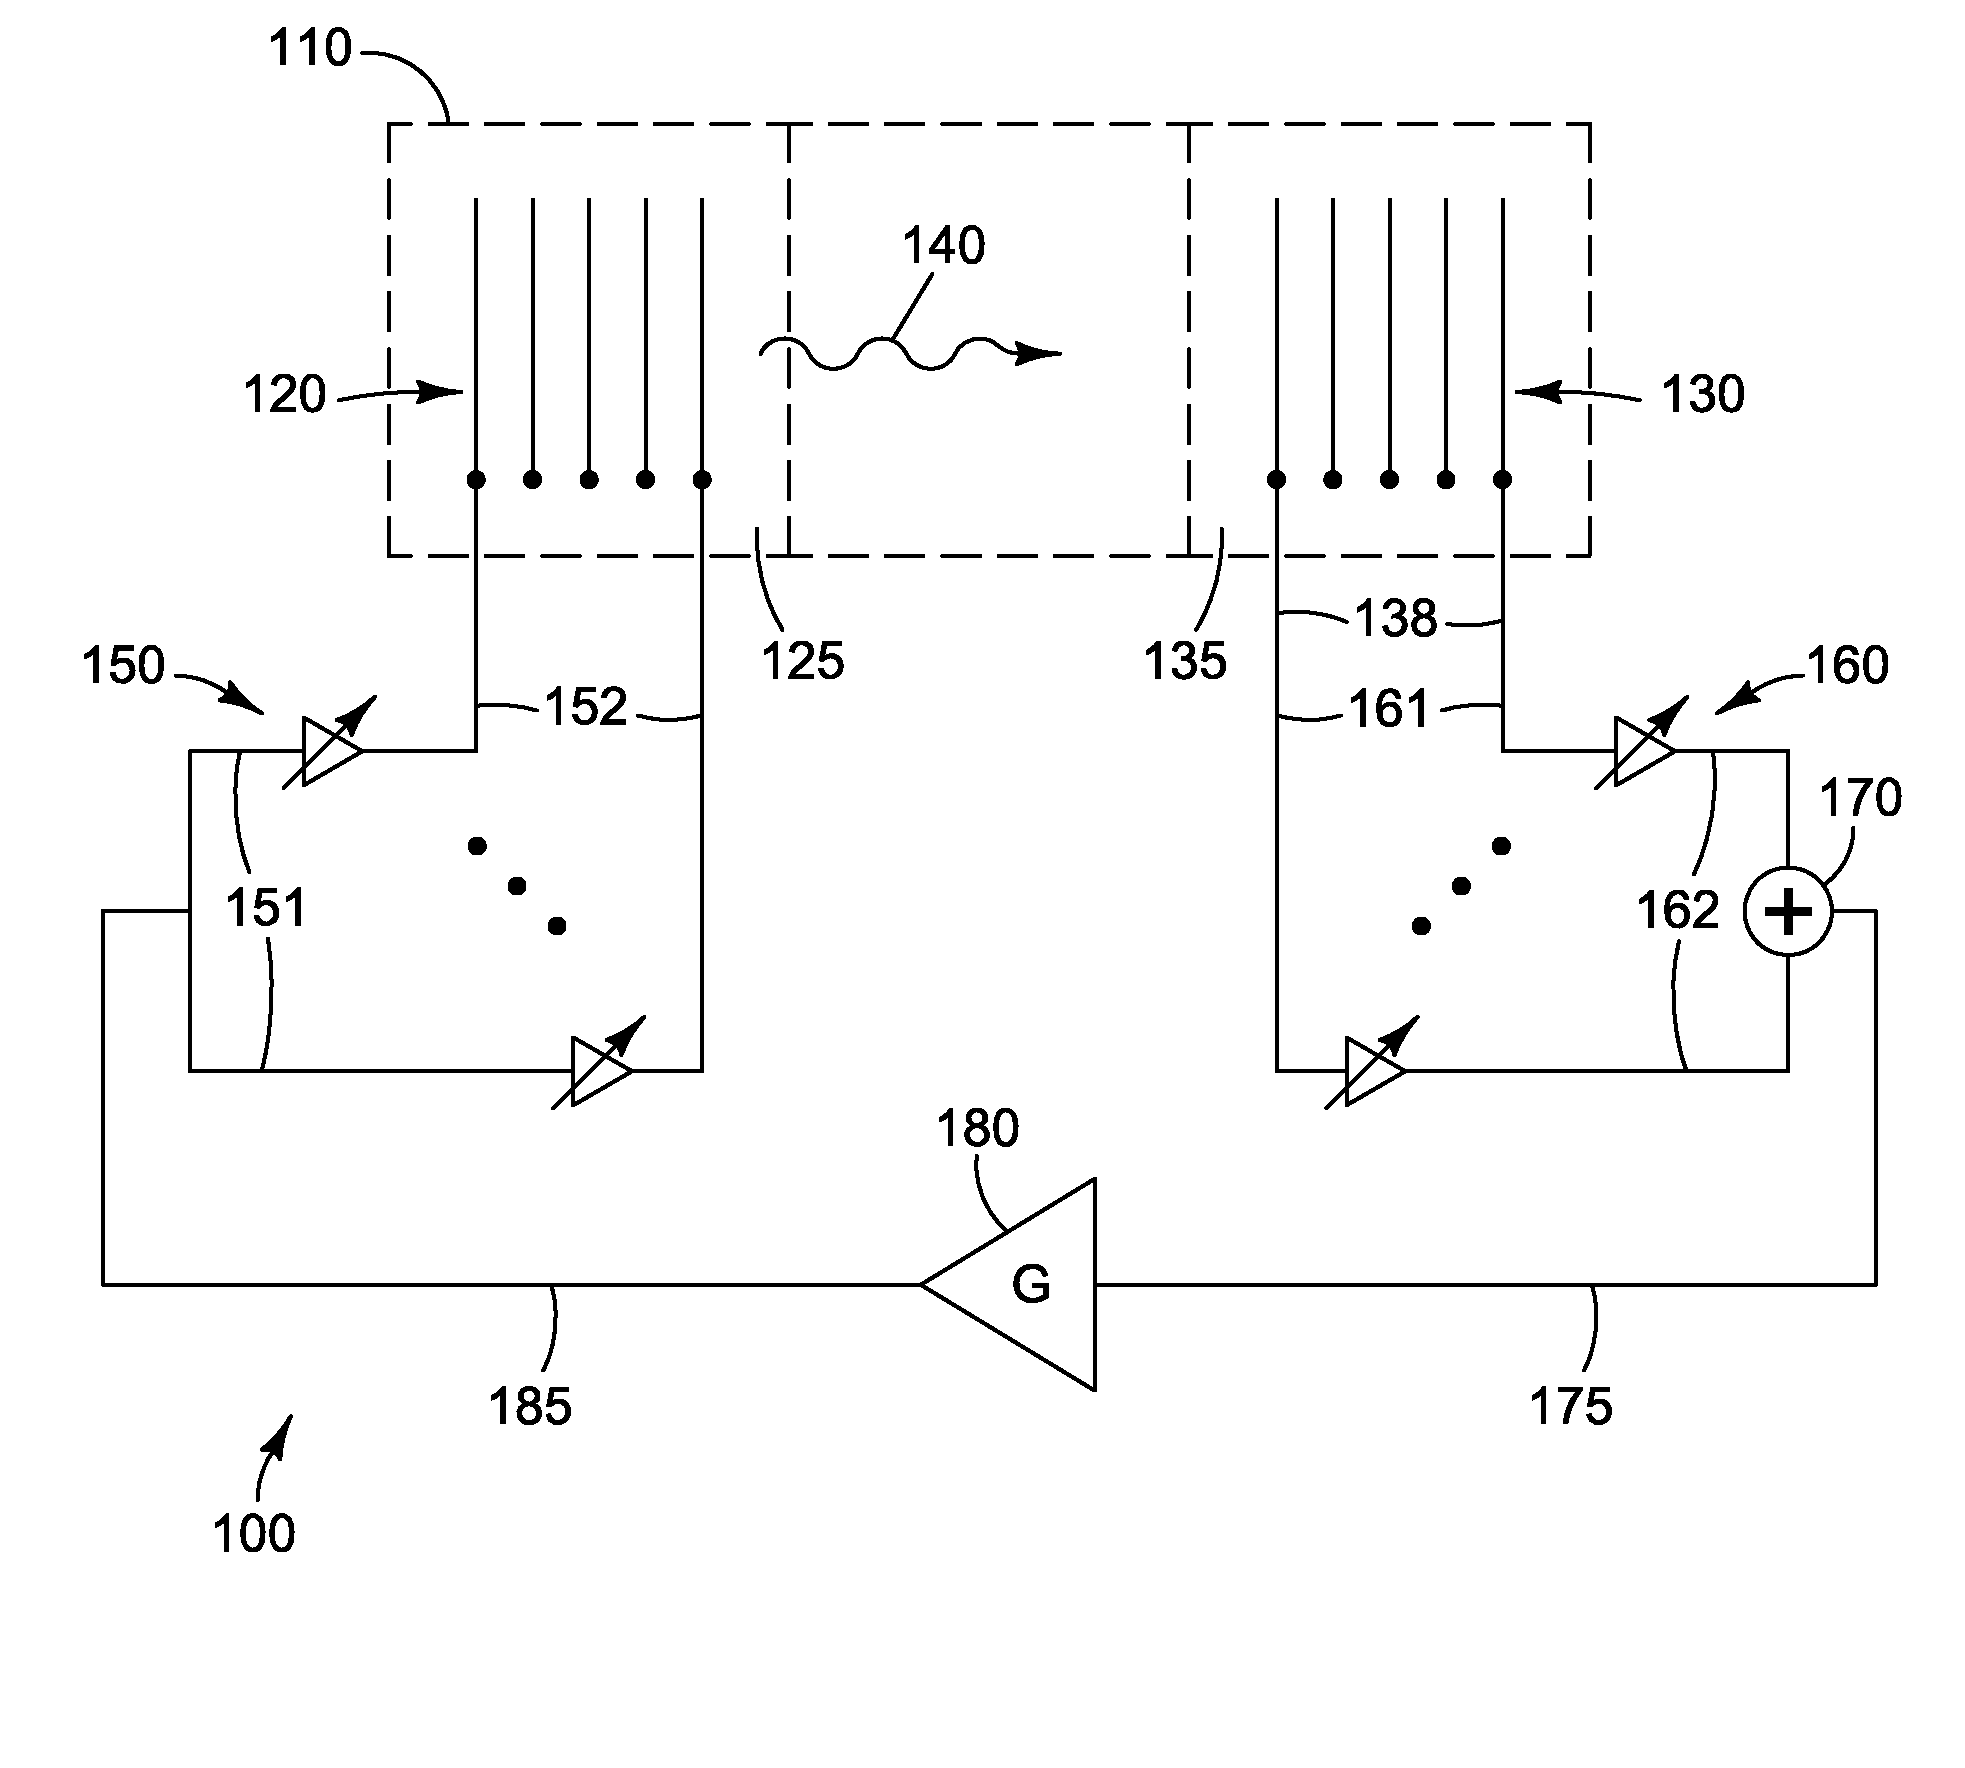 Frequency adjustable surface acoustic wave oscillator